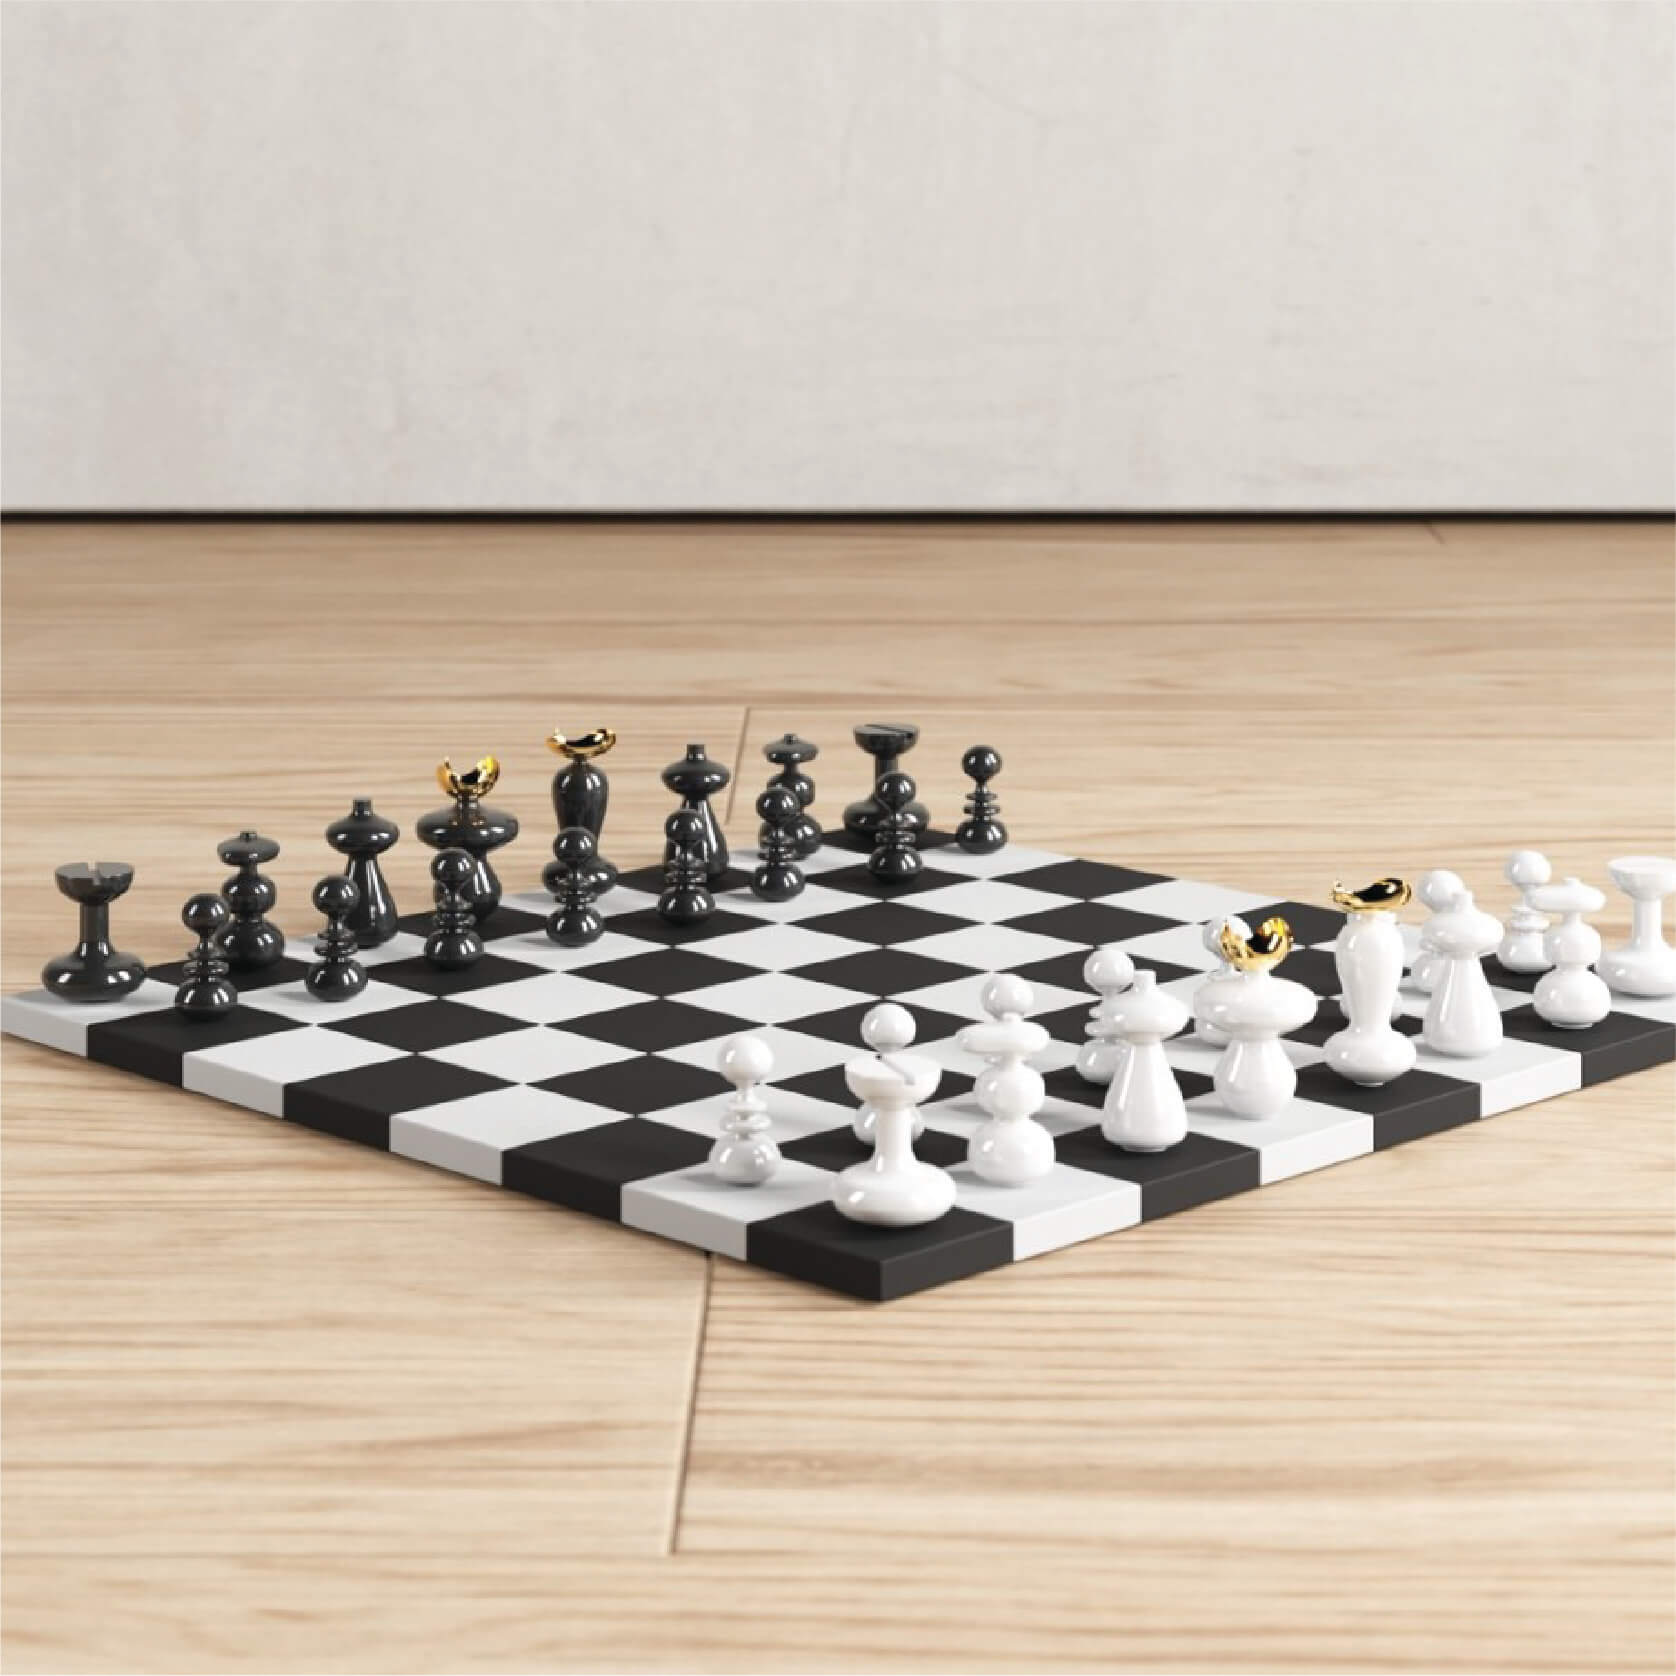 CHESS by Bon-Ace Fashion Tools, Inc. - Design Commune Feature